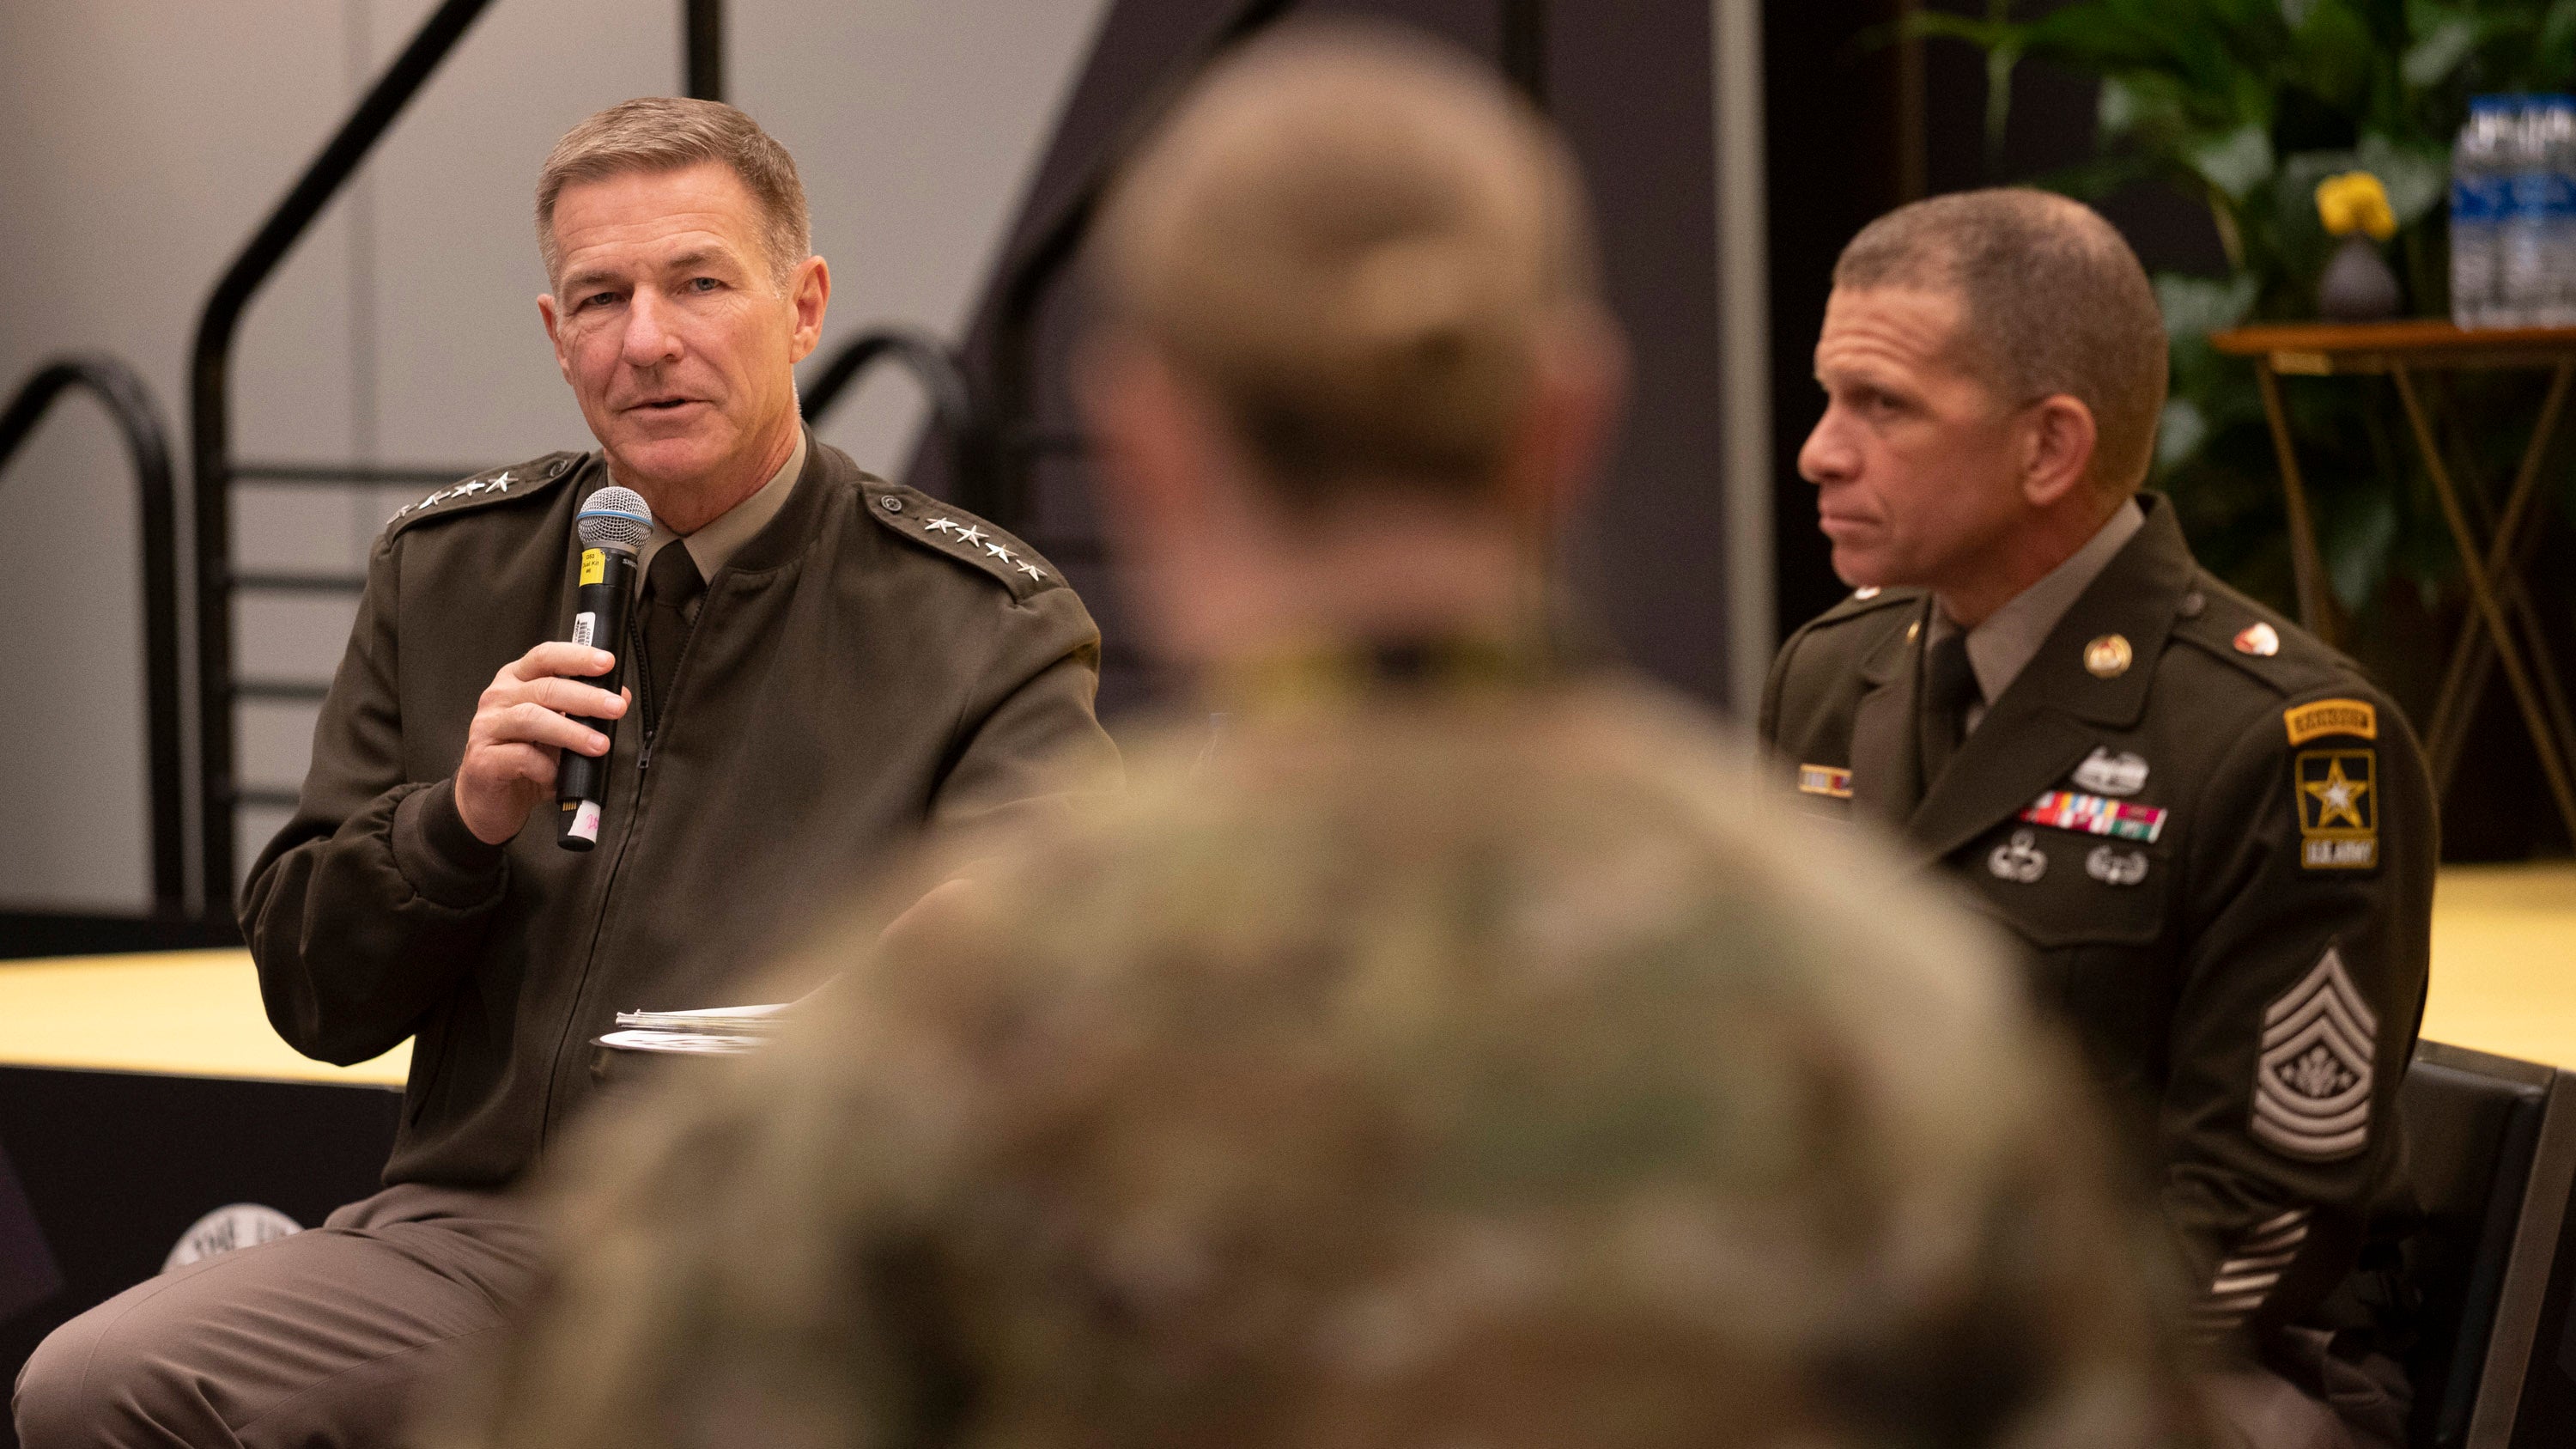 Chief of Staff of the Army Gen. James McConville and Sergeant Major of the Army Michael Grinston participate in the Solarium Briefing with Senior Leaders at AUSA 2022 Annual Meeting in Washington, D.C., Wednesday, Oct. 12, 2022. (Jeromie Stephens for AUSA)